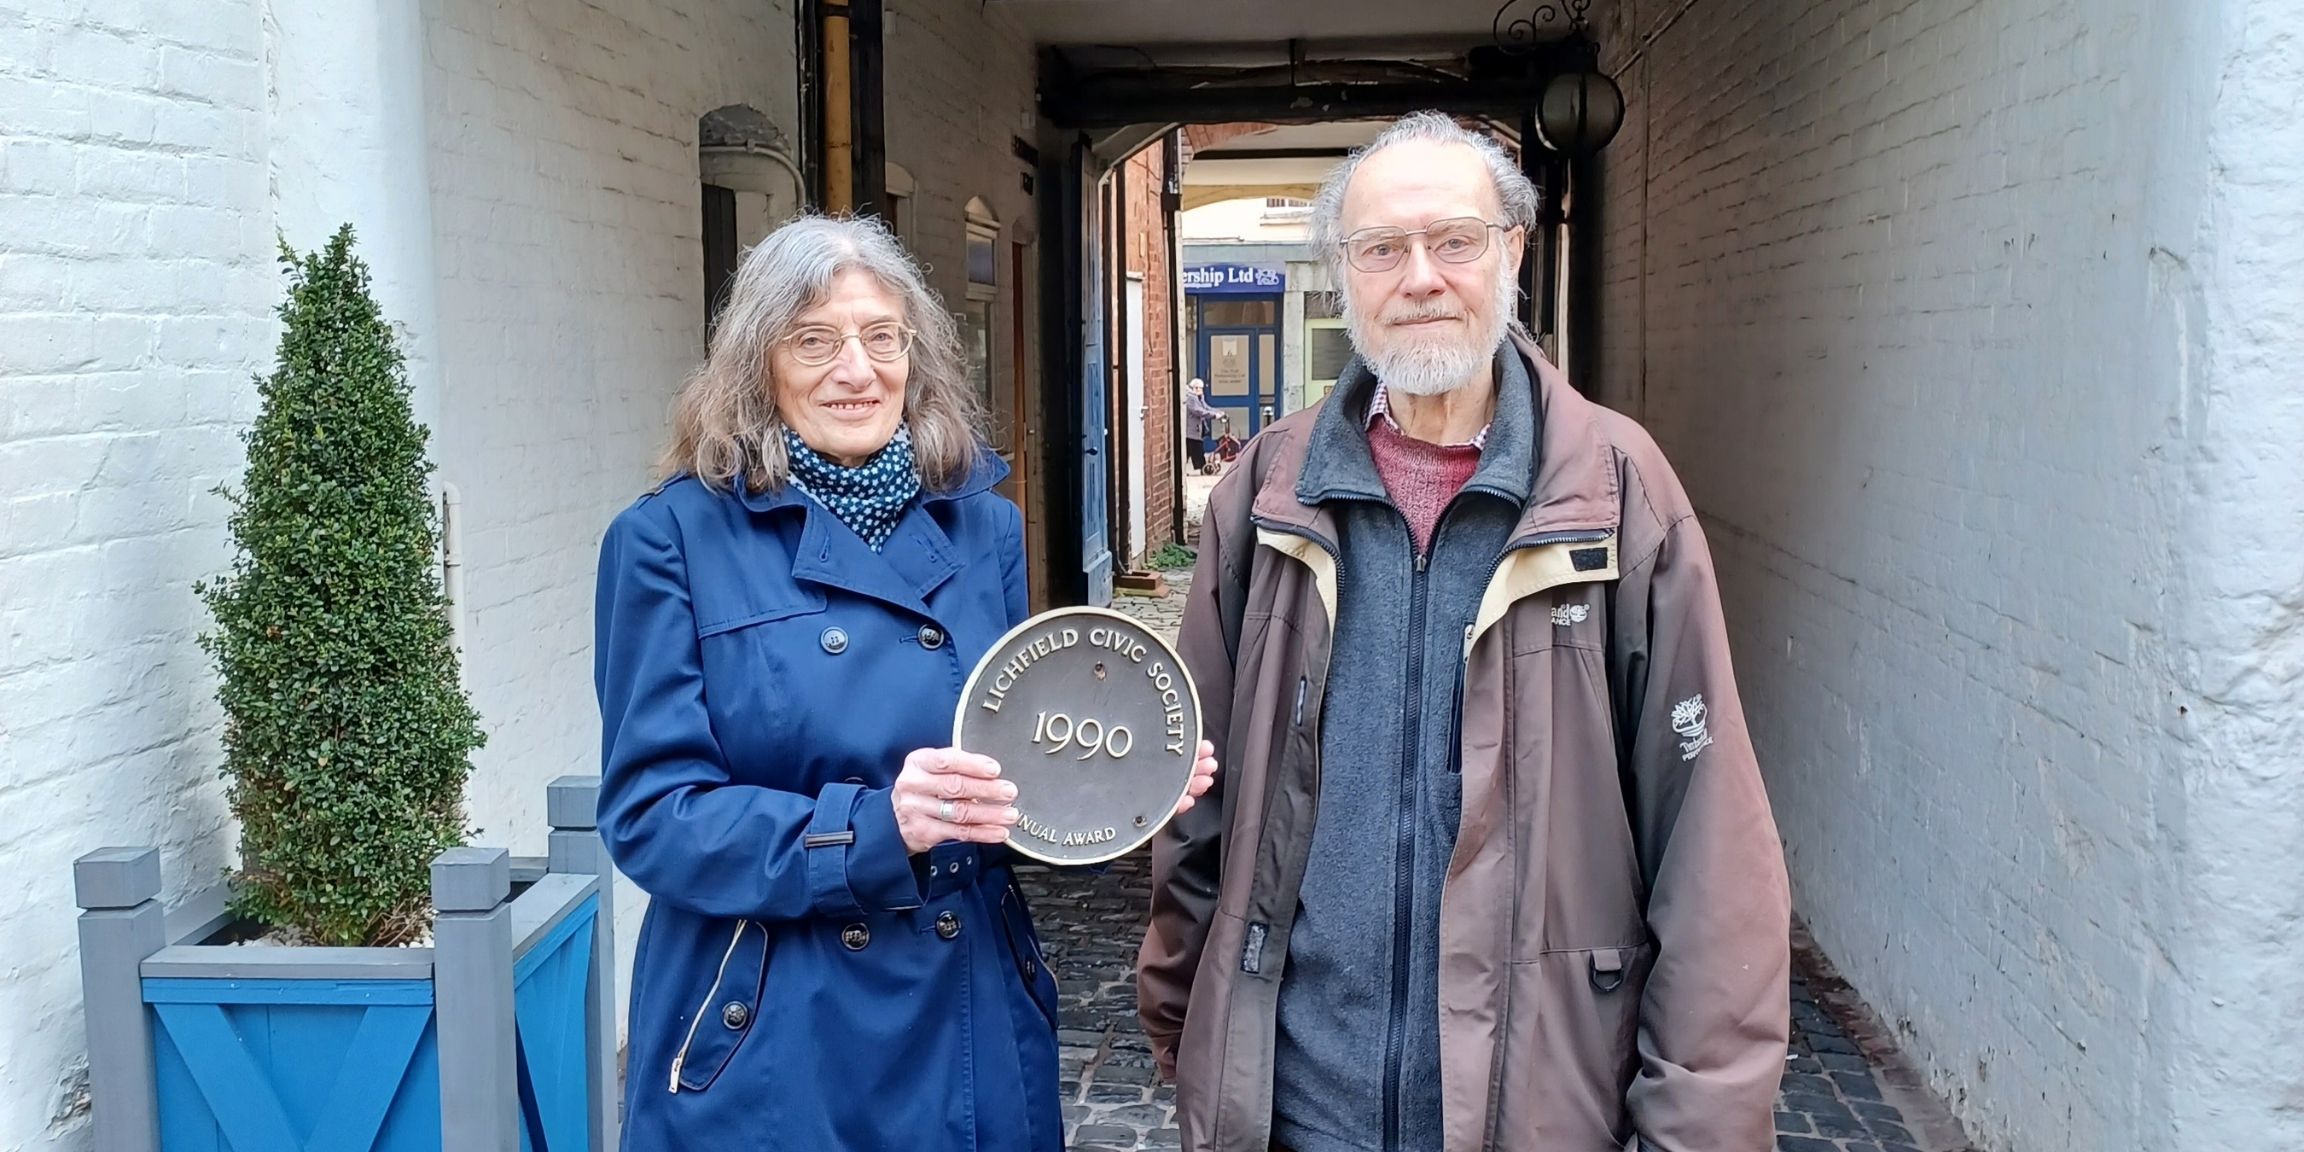 Lorna and Peter from the Lichfield Civic Society